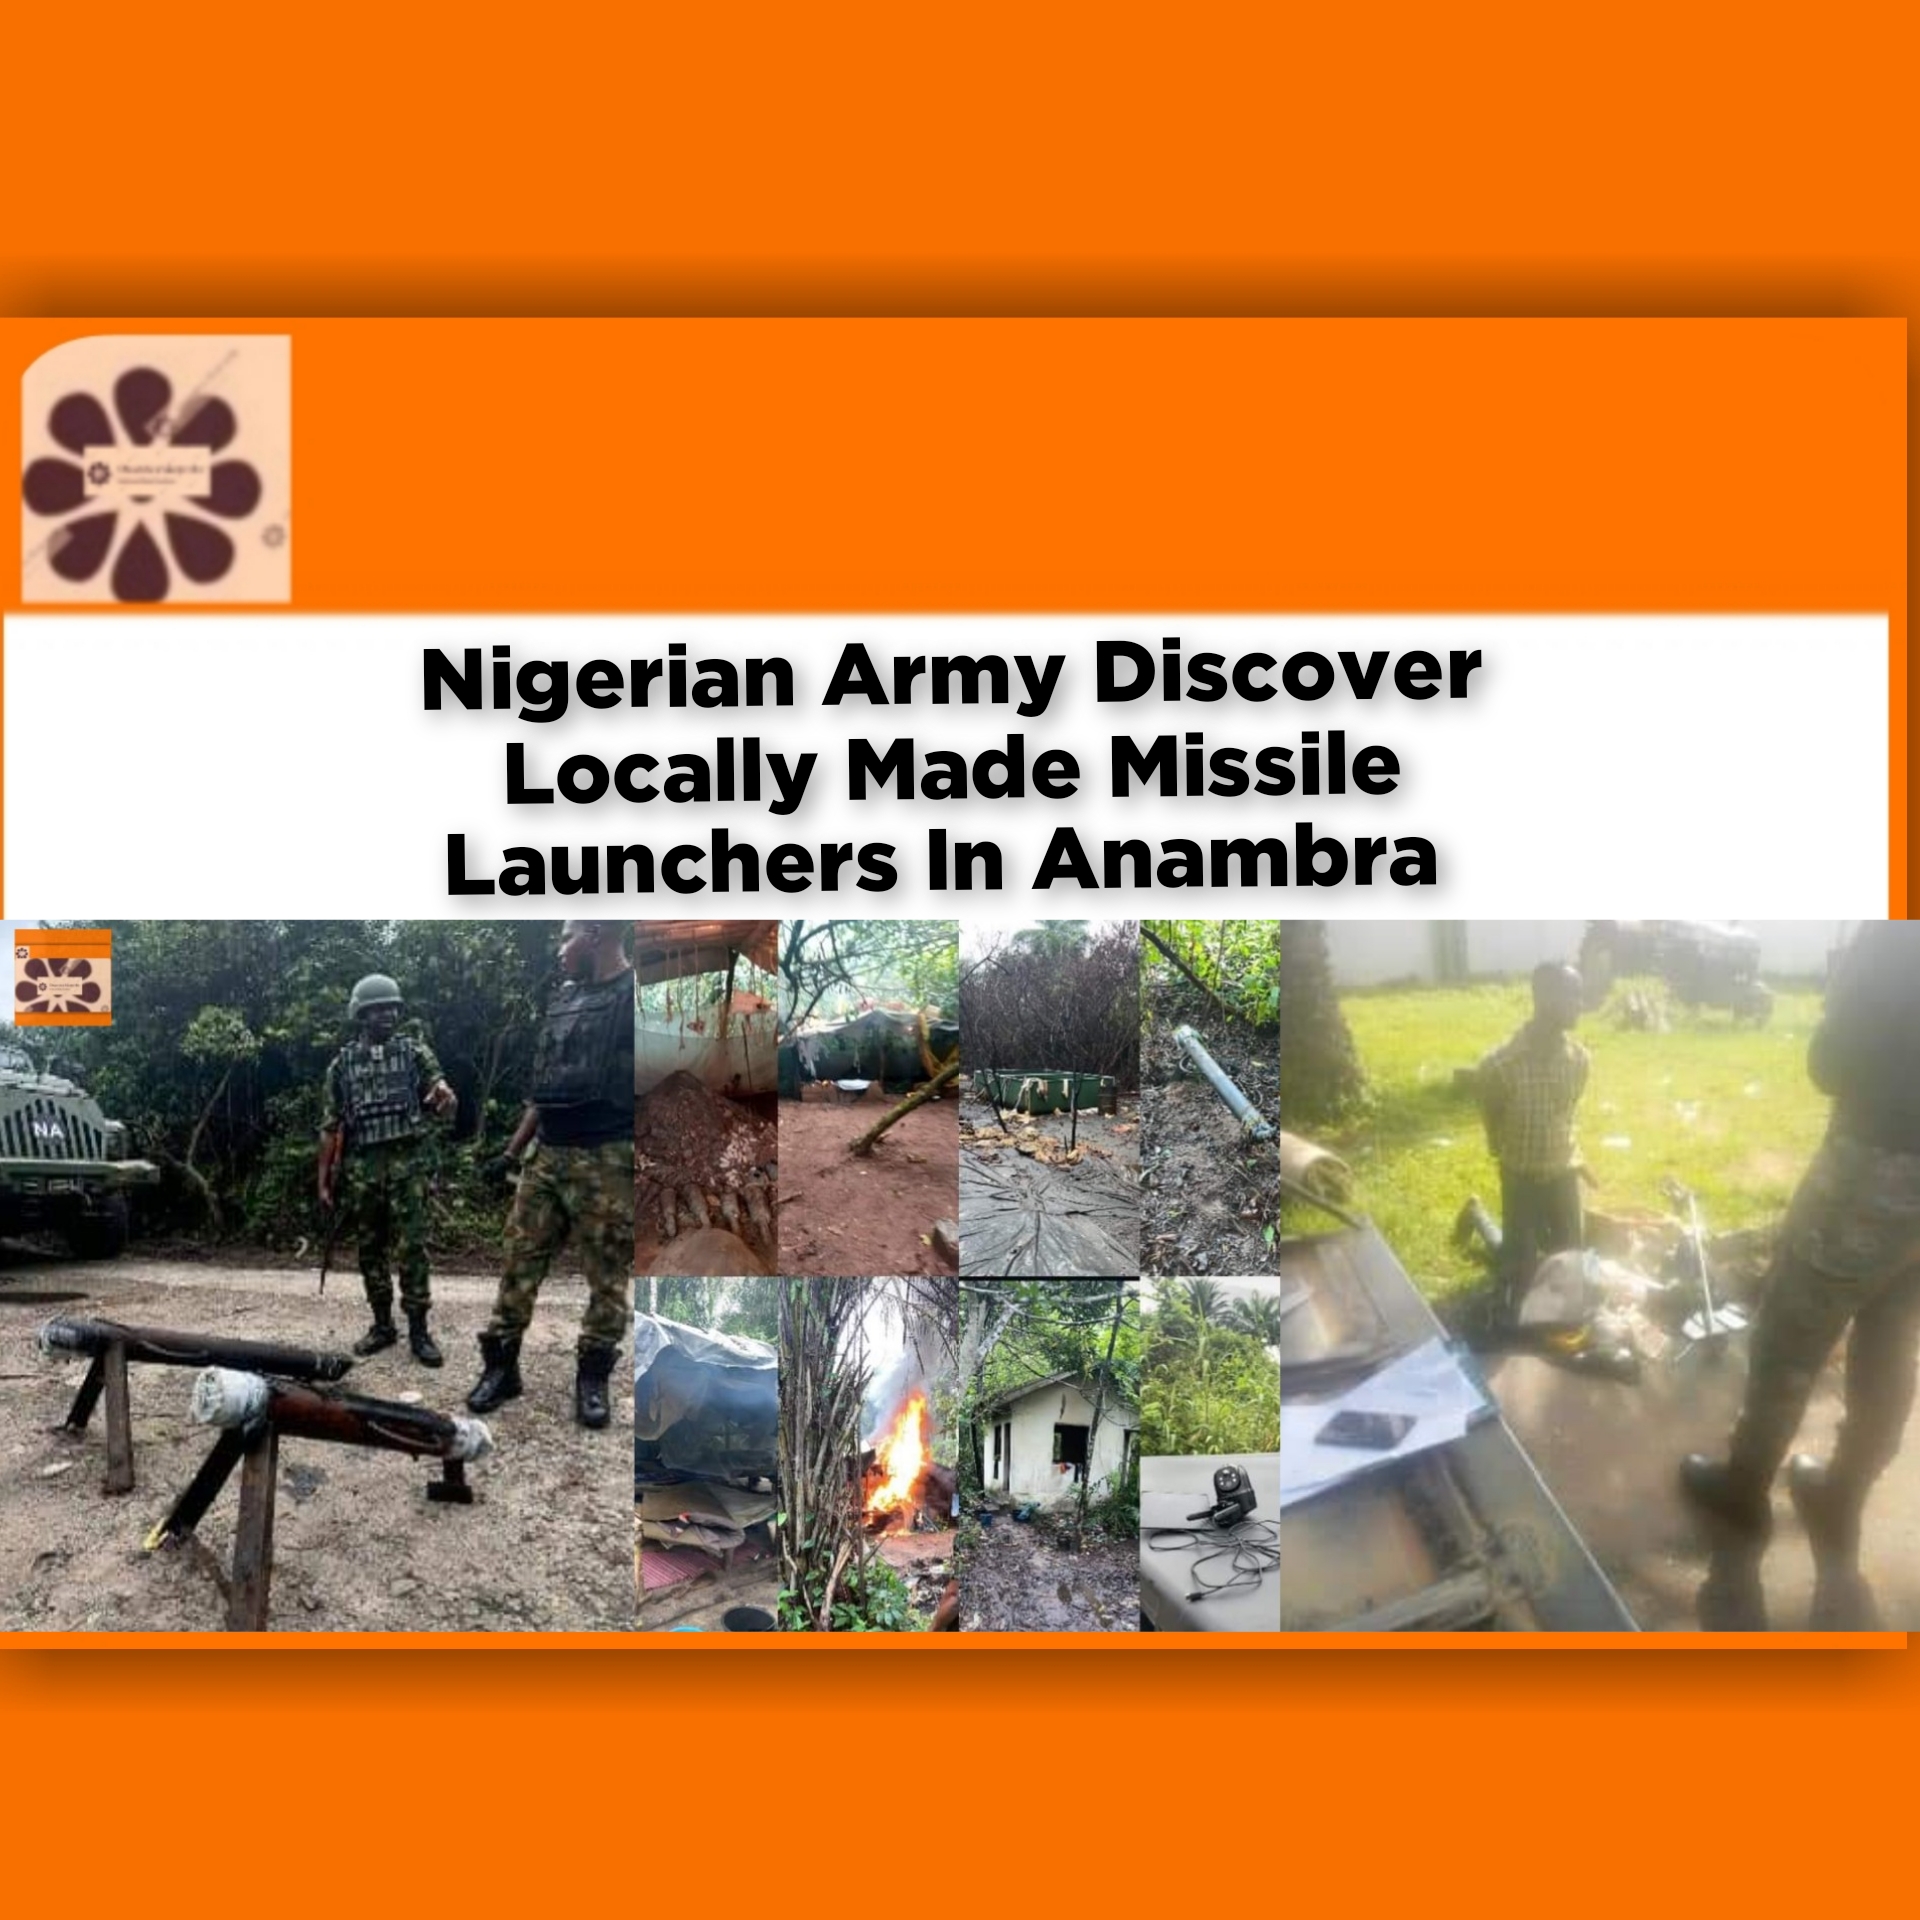 Nigerian Army Discover Locally Made Missile Launchers In Anambra ~ OsazuwaAkonedo #Anambra #Artillery #Biafra #ESN #Gunmen #ipob #Missile #Projectile #Unknown